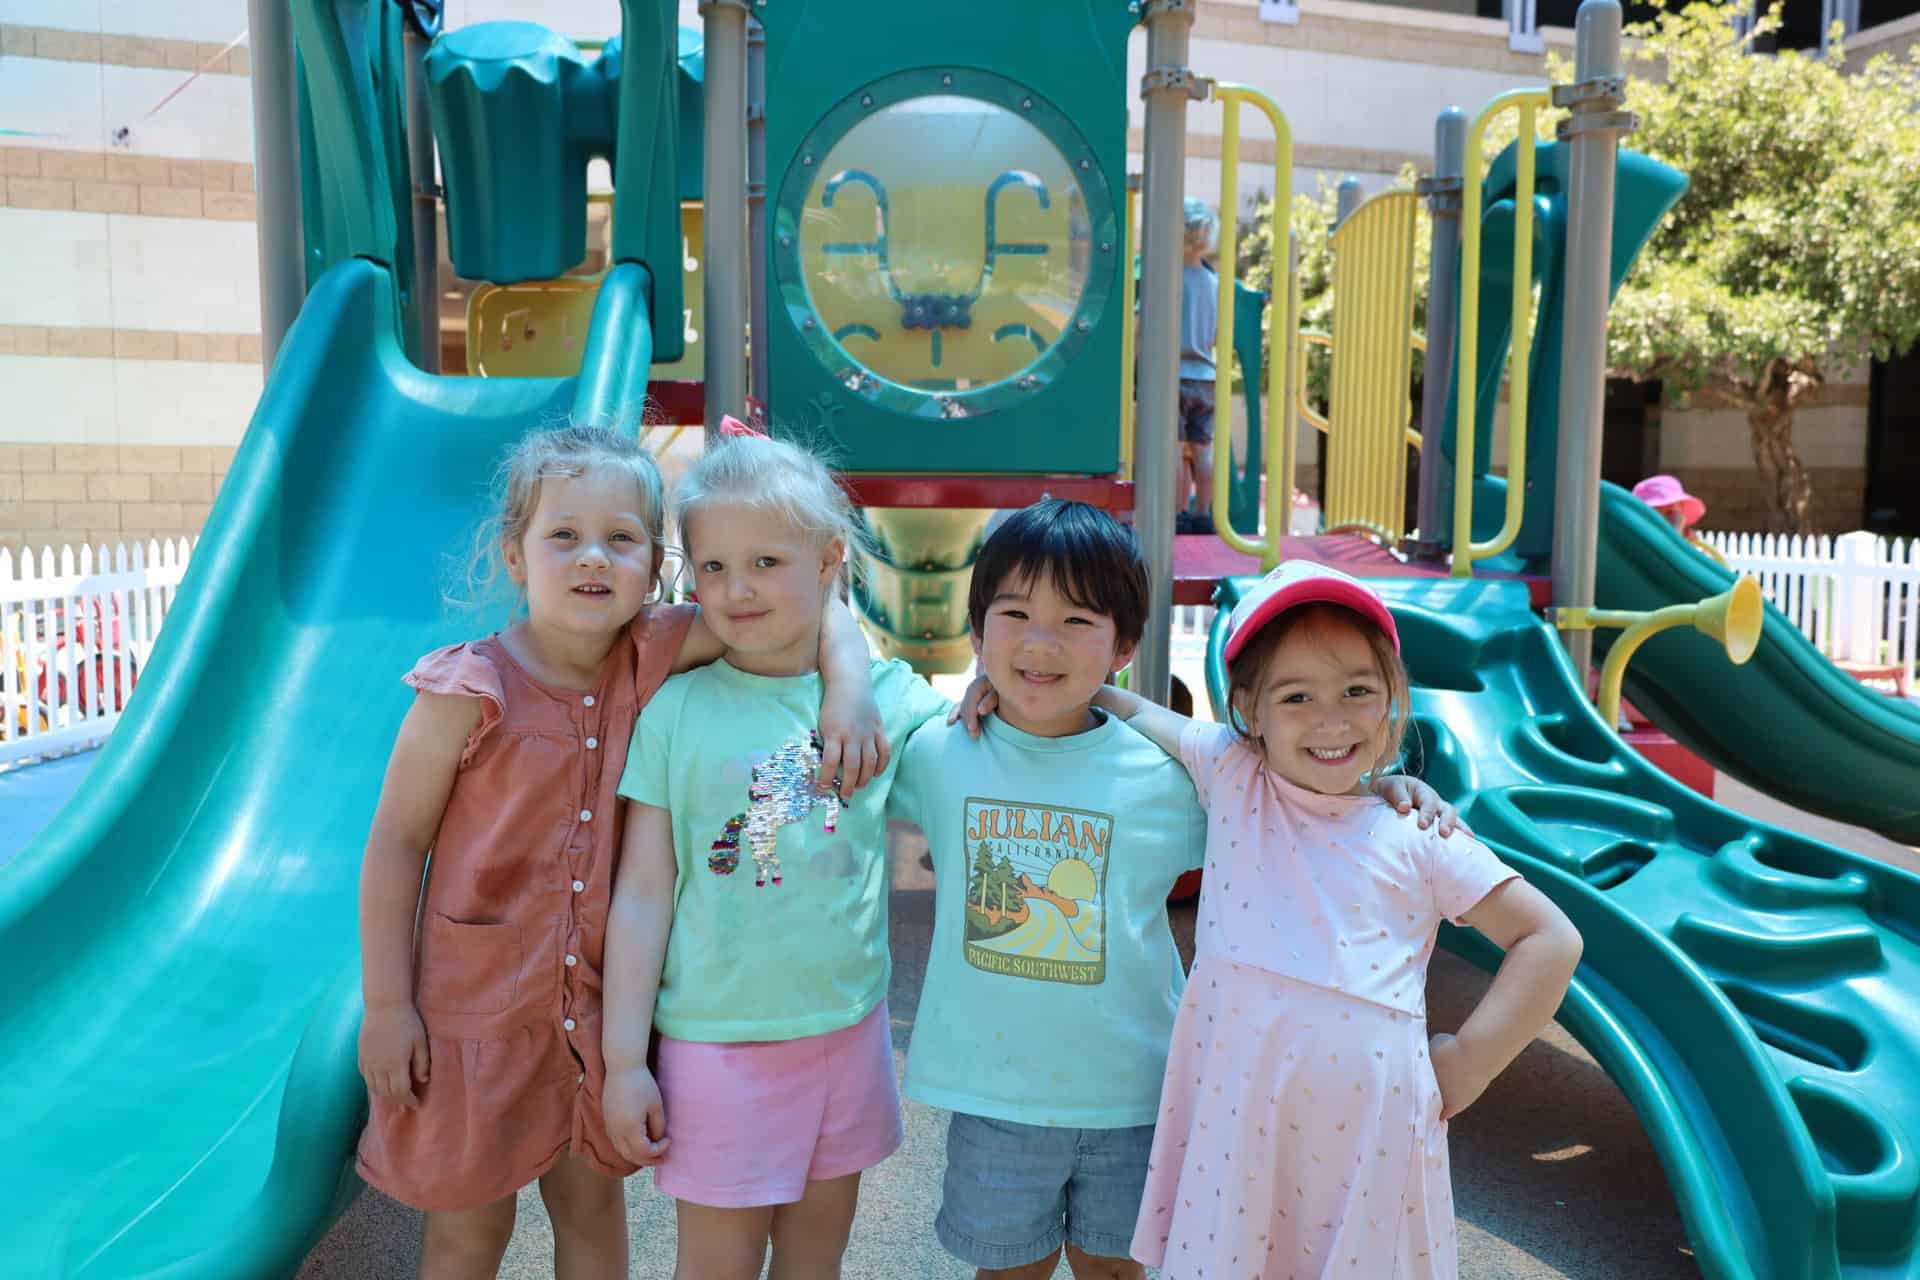 Preschool students pose together on a playground.